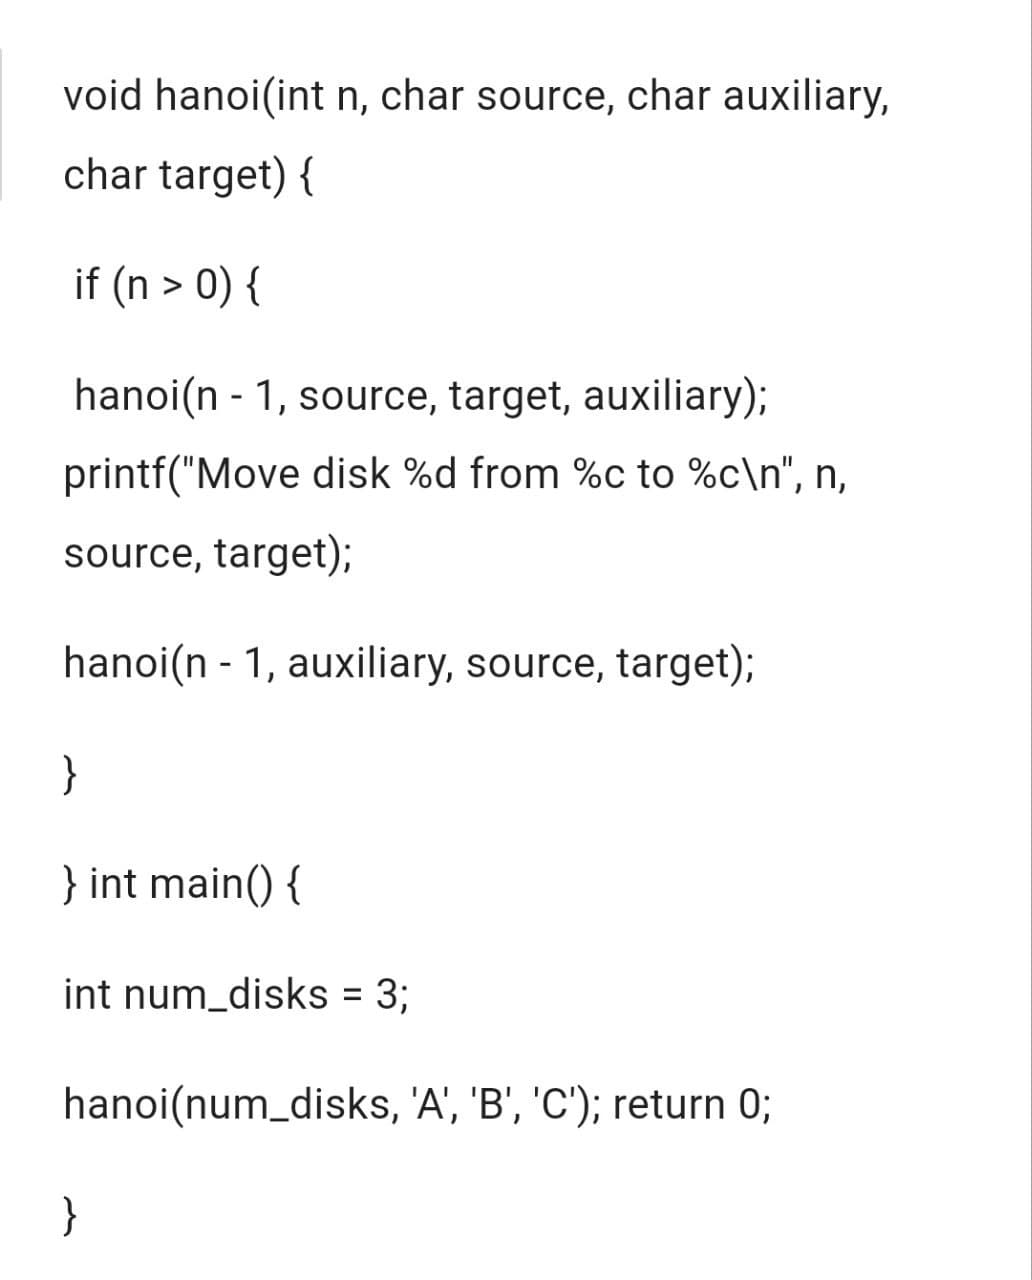 void hanoi(int n, char source, char auxiliary,
char target) {
if (n > 0) {
hanoi(n-1, source, target, auxiliary);
printf("Move disk %d from %c to %c\n", n,
source, target);
hanoi(n-1, auxiliary, source, target);
}
} int main() {
int num_disks = 3;
hanoi(num_disks, 'A', 'B', 'C'); return 0;
}